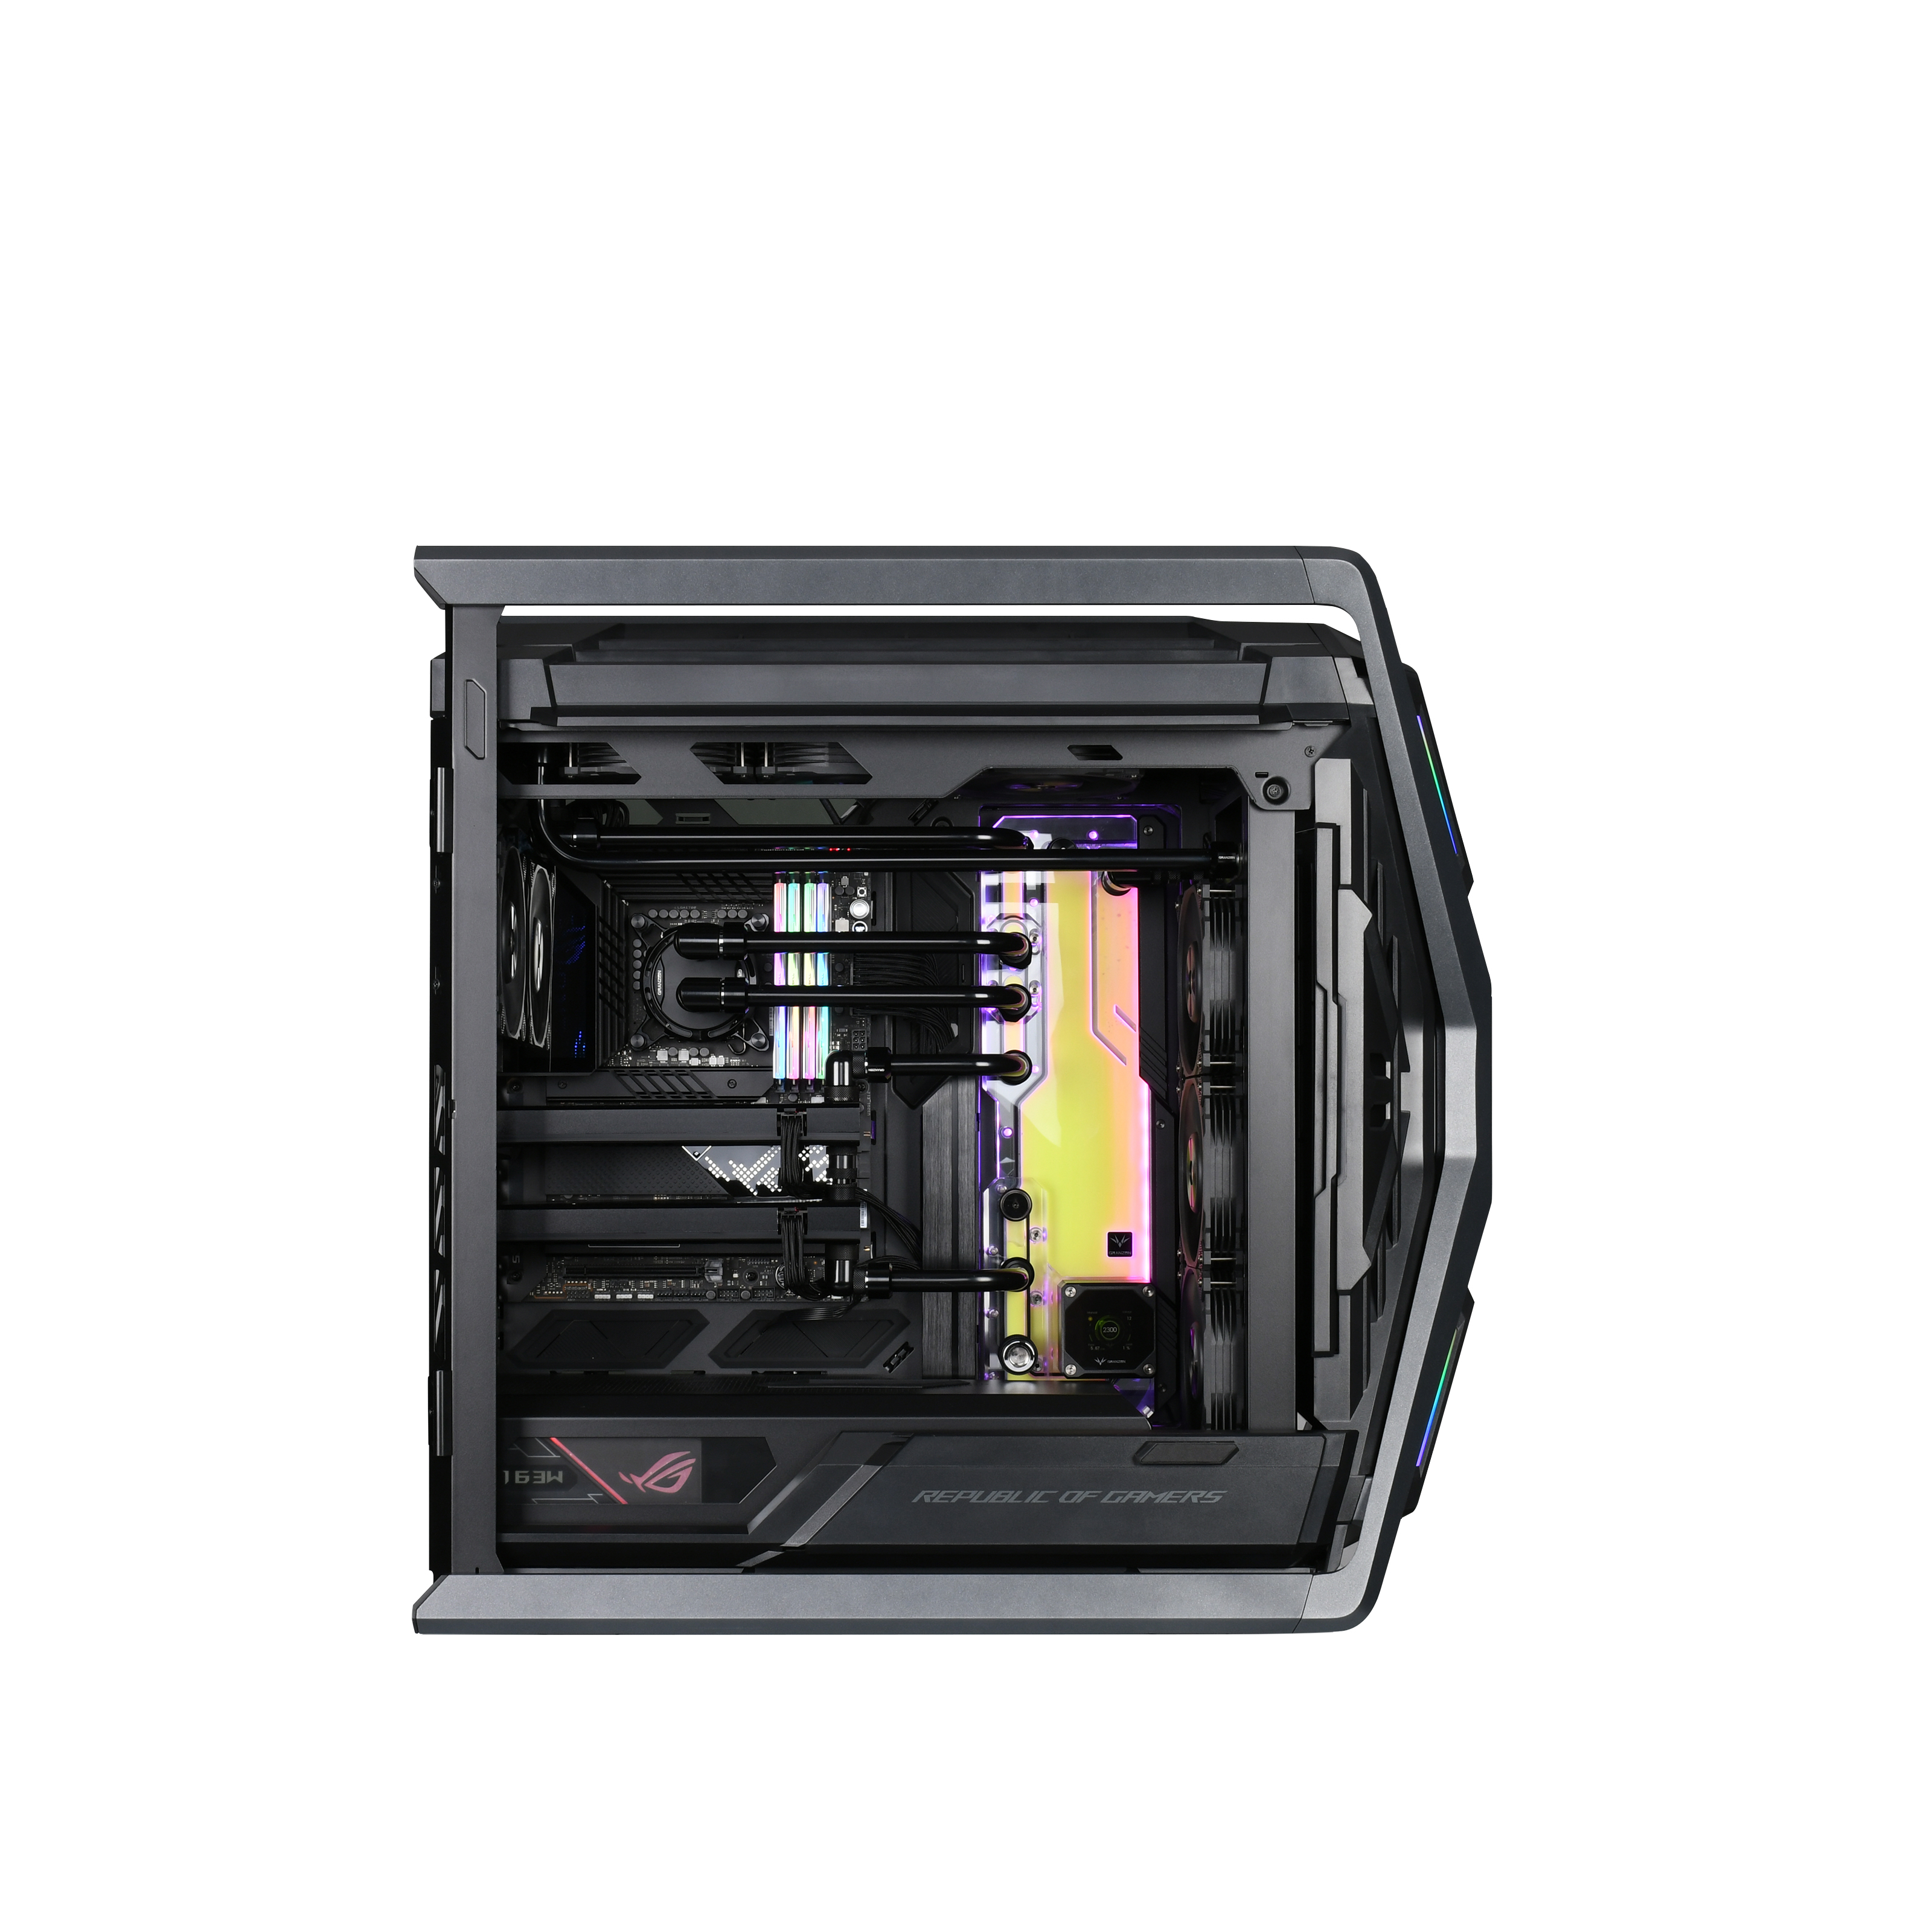 https://images.51microshop.com/860/product/20230425/Granzon_Advanced_Distro_Plate_Kit_For_Asus_ROG_Hyperion_GR701_Case_5V_A_RGB_Complete_Loop_For_Single_GPU_PC_Building_Water_Cooling_Waterway_Board_GC_AS_GR701_1682413794216_0.jpg